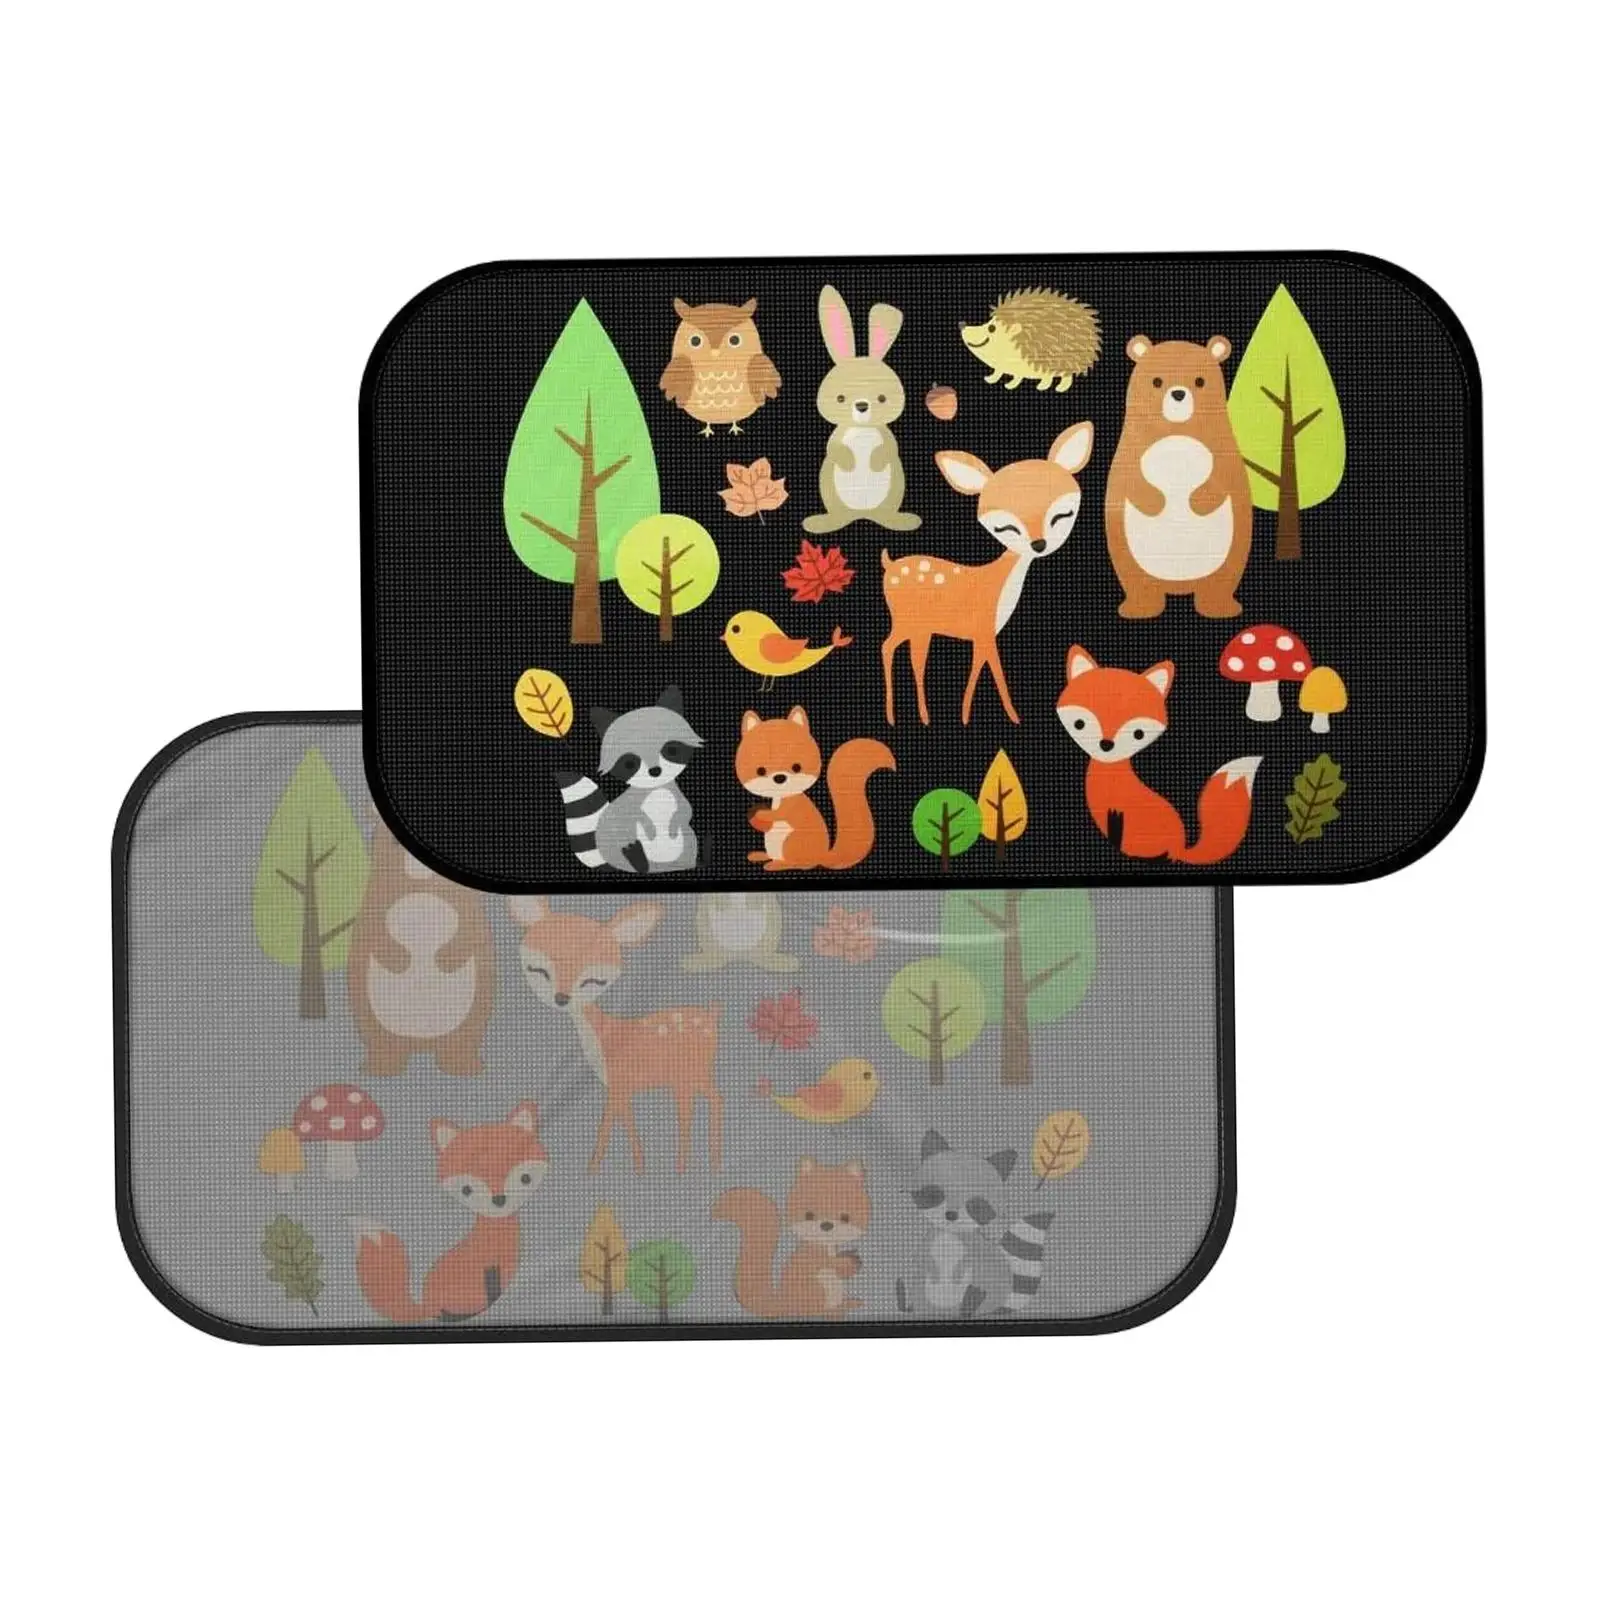 2Pcs Car Window Sun Shades Cute Animals Patterns Block Direct Sunlight and Heat Privacy Protection Privacy Curtain for Baby